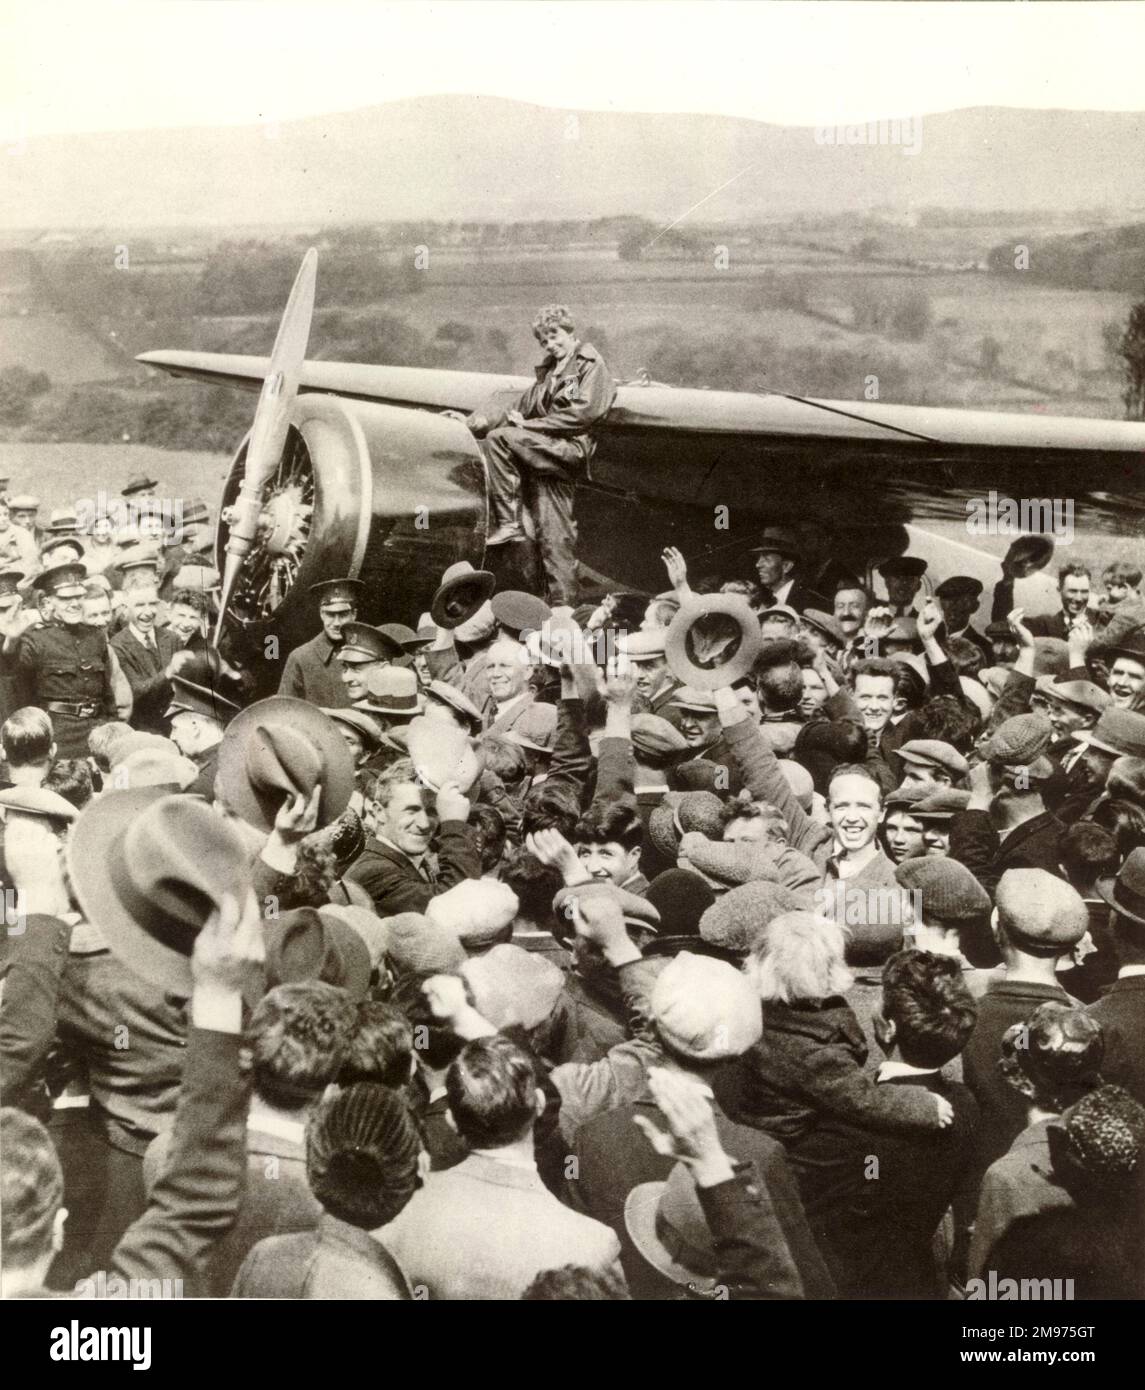 Amelia Earhart with her Lockheed Vega 5b, Old Bessie, after her arrival at Culmore, near Londonderry. 21 May 1932. Stock Photo